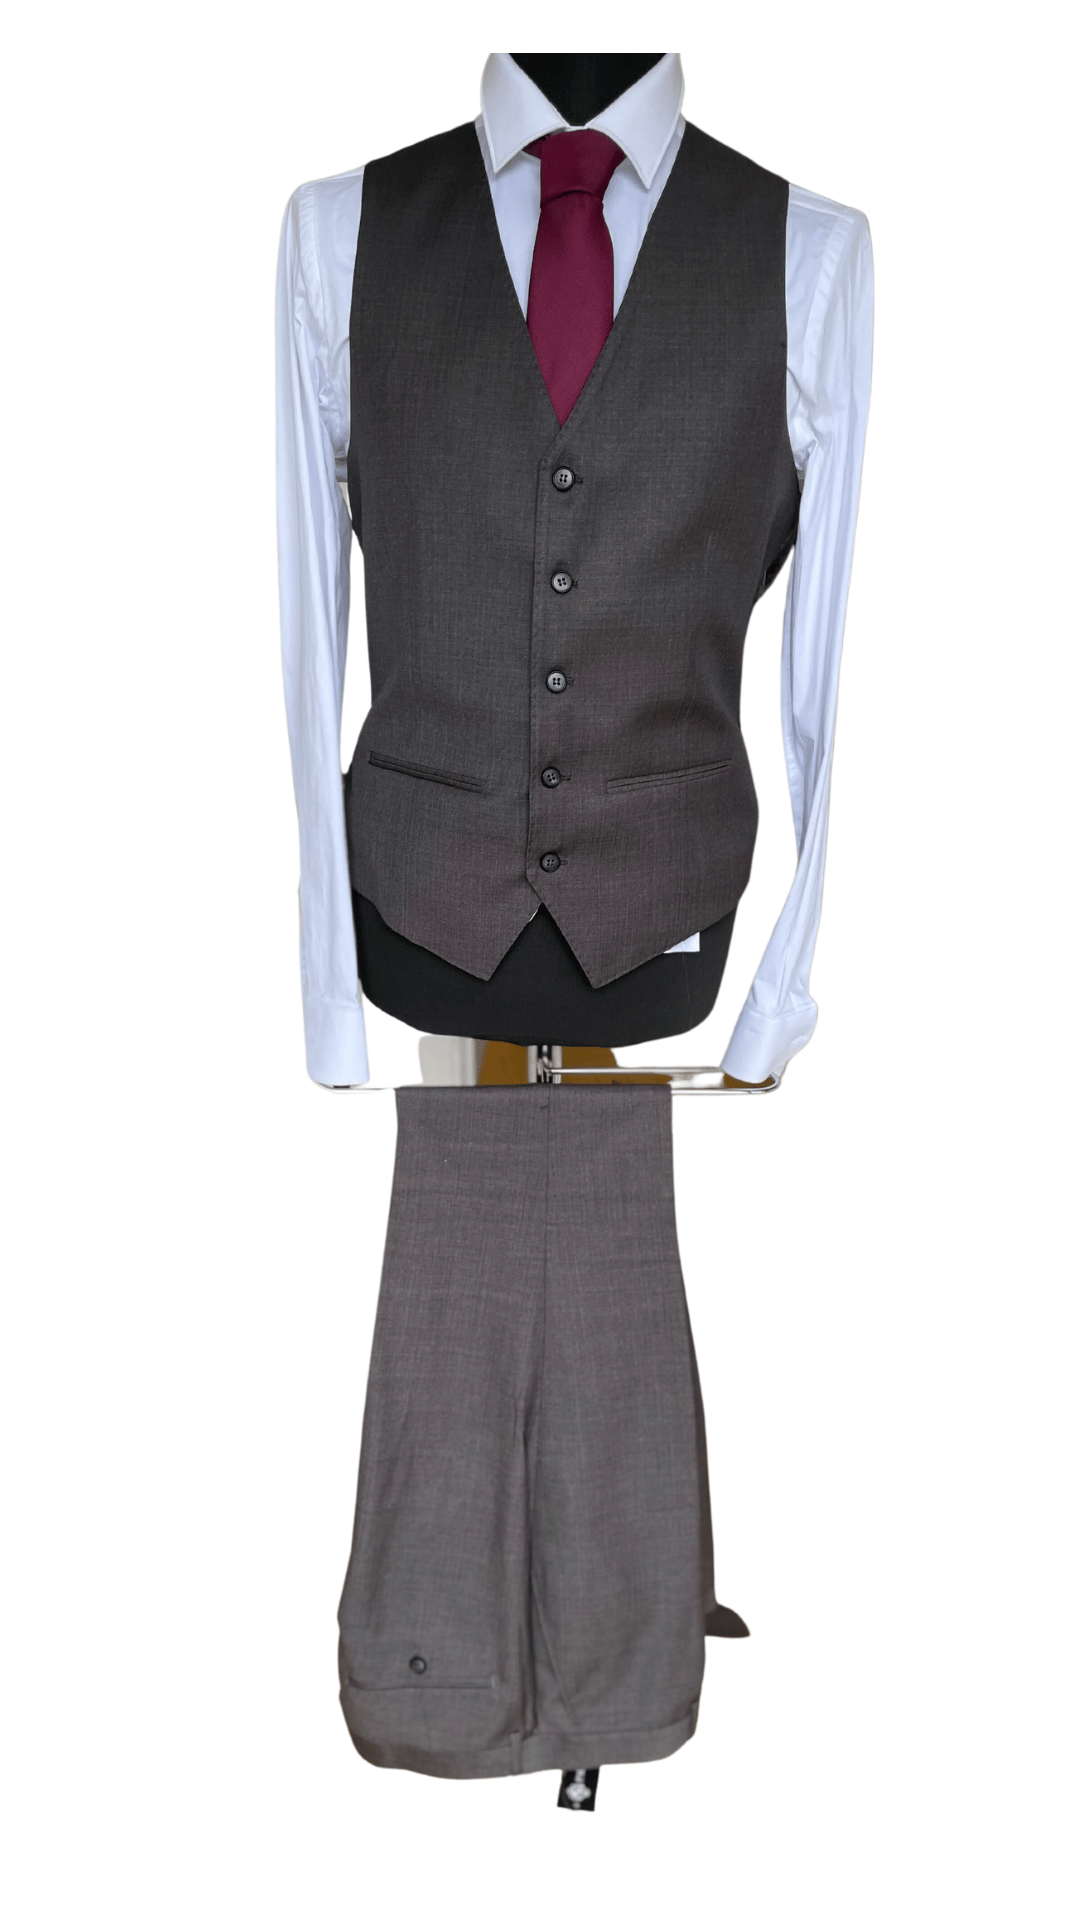 Paul Andrew Charles Charcoal grey 3 piece suit